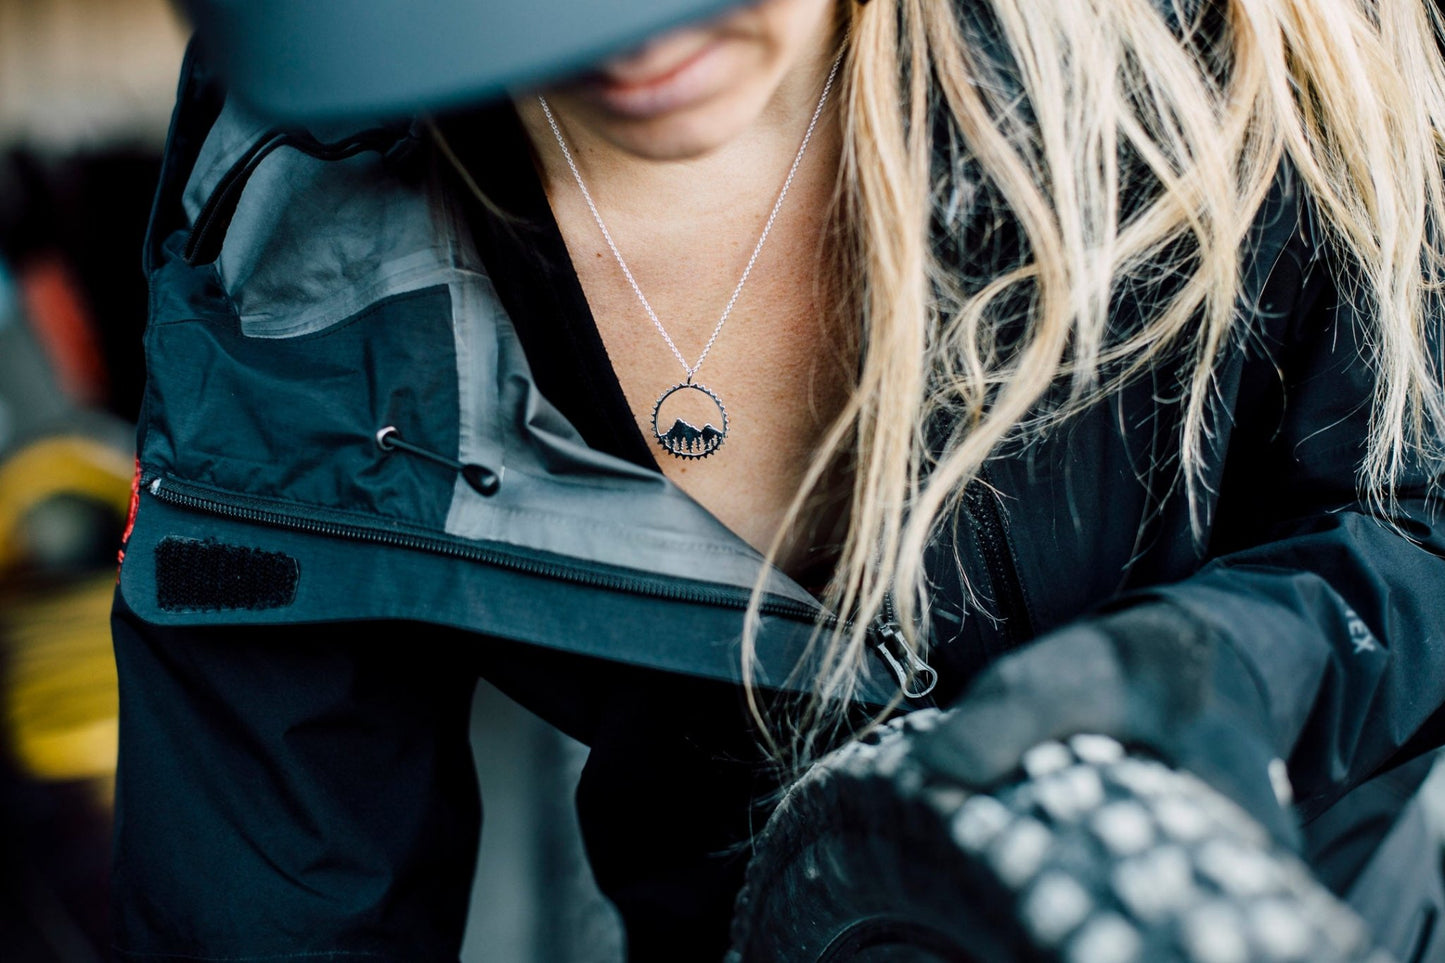 Model wearing silver Amore necklace while wearing black hat and jacket while working on her bike with bike tire in her hand